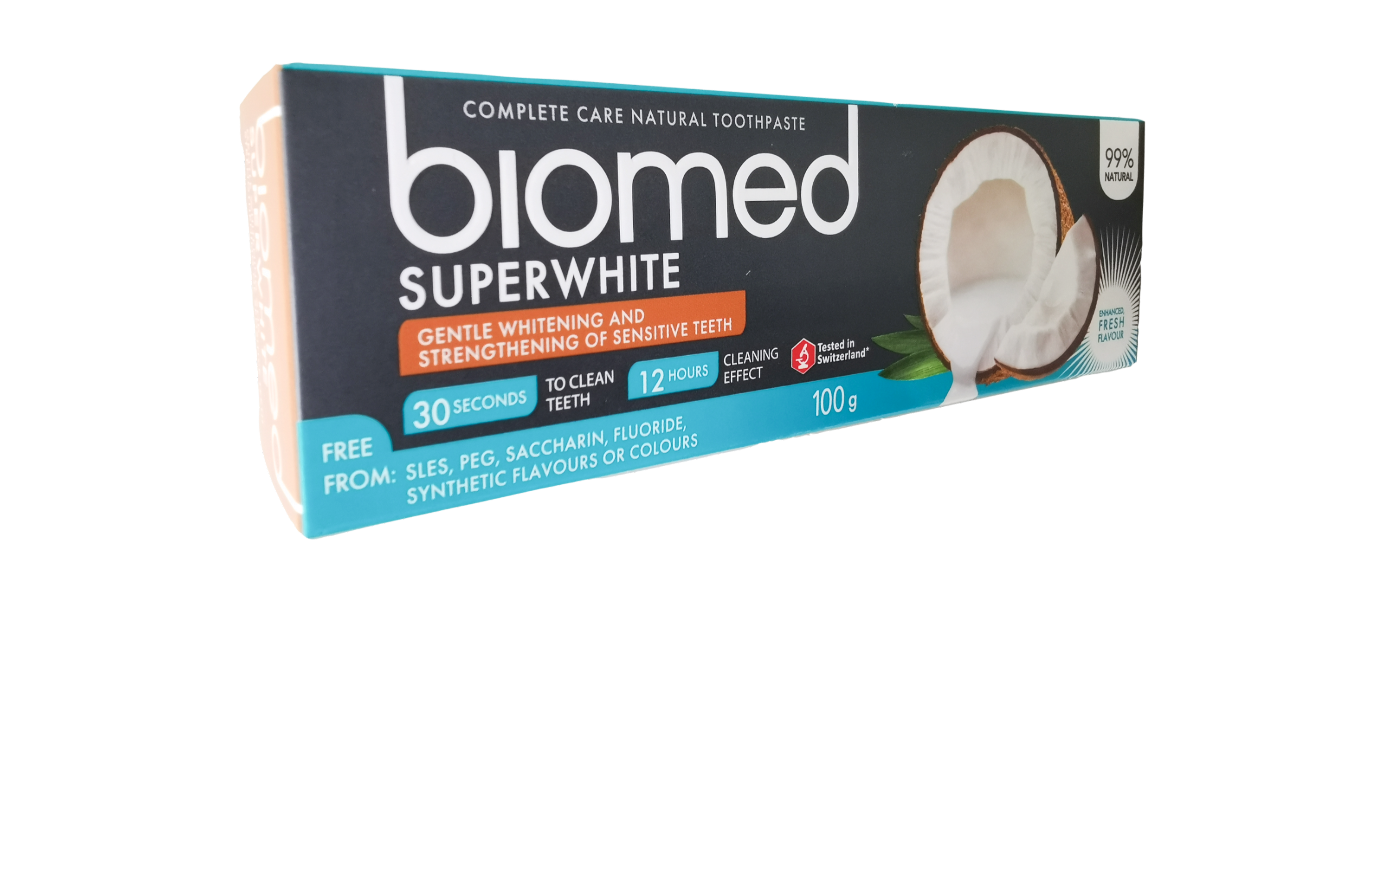 Biomed Superwhite Toothpaste